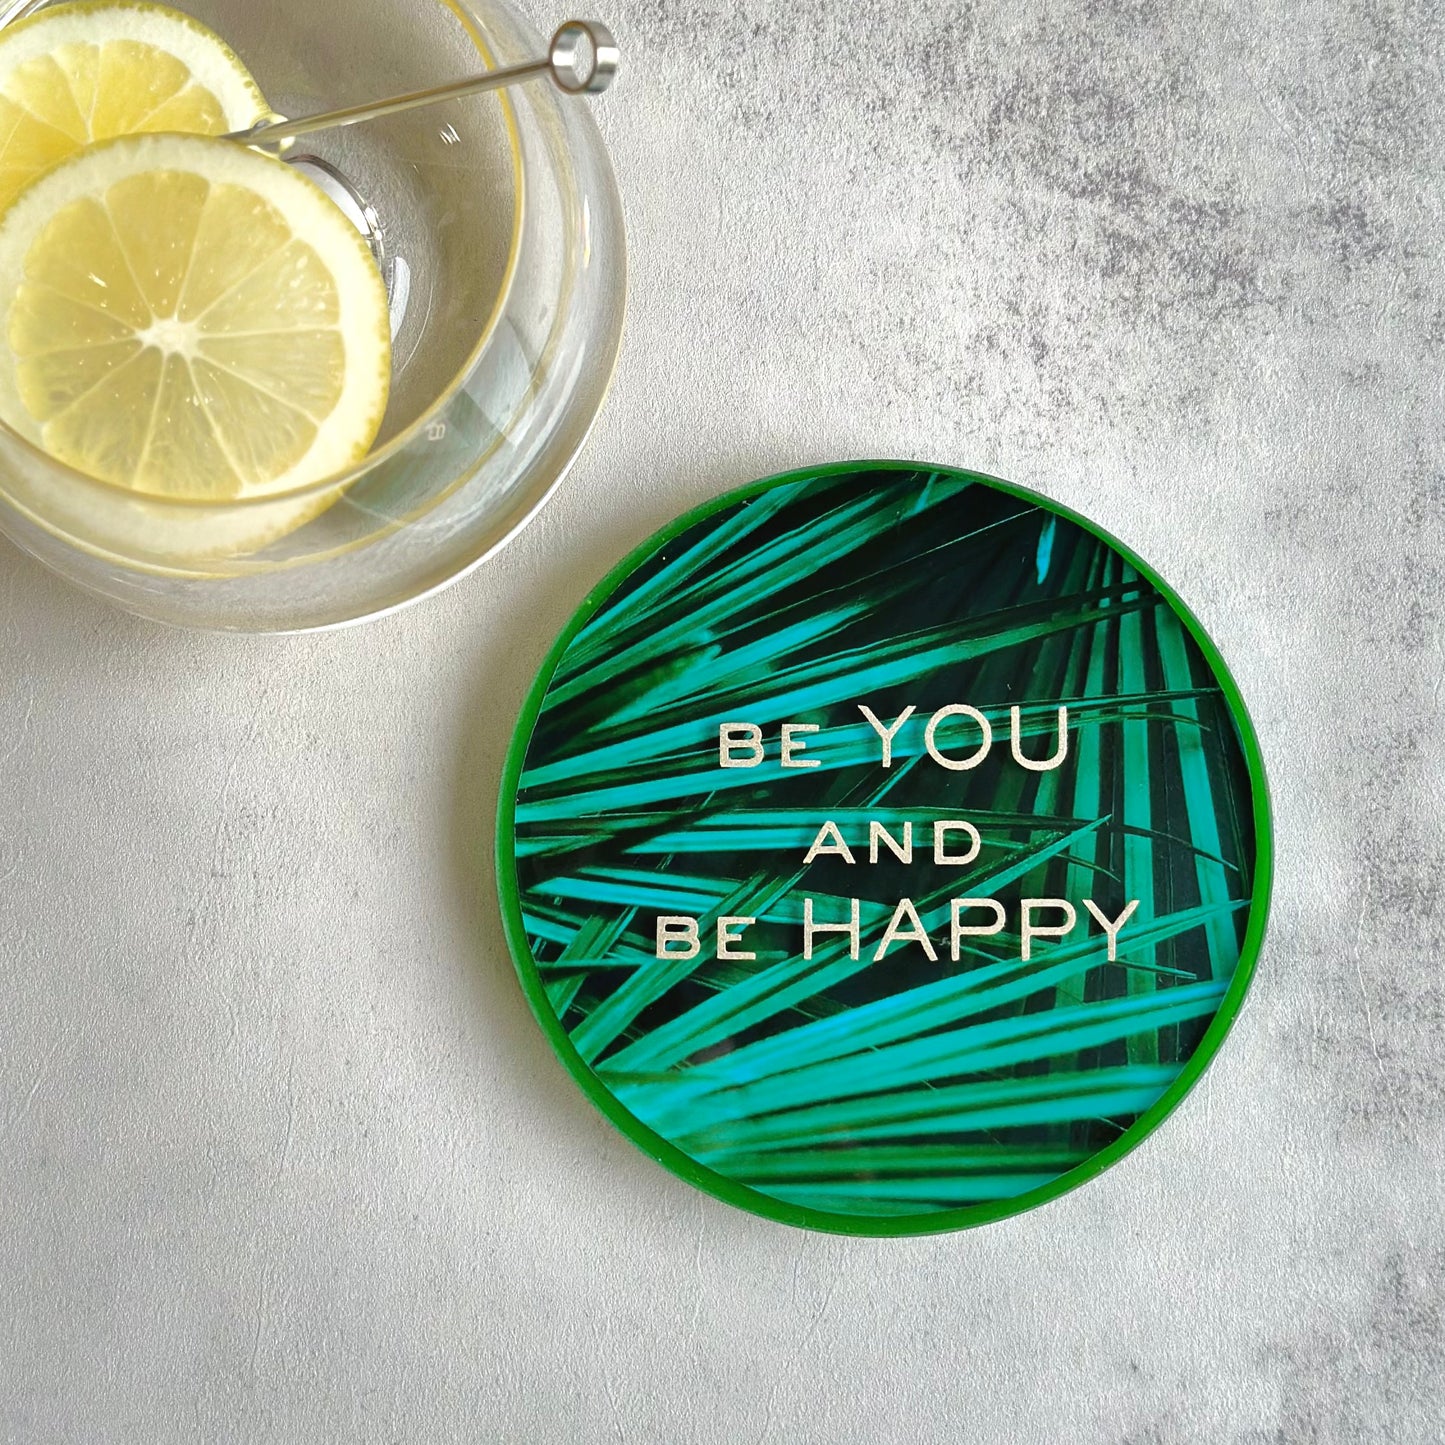 Be YOU and be HAPPY Coaster